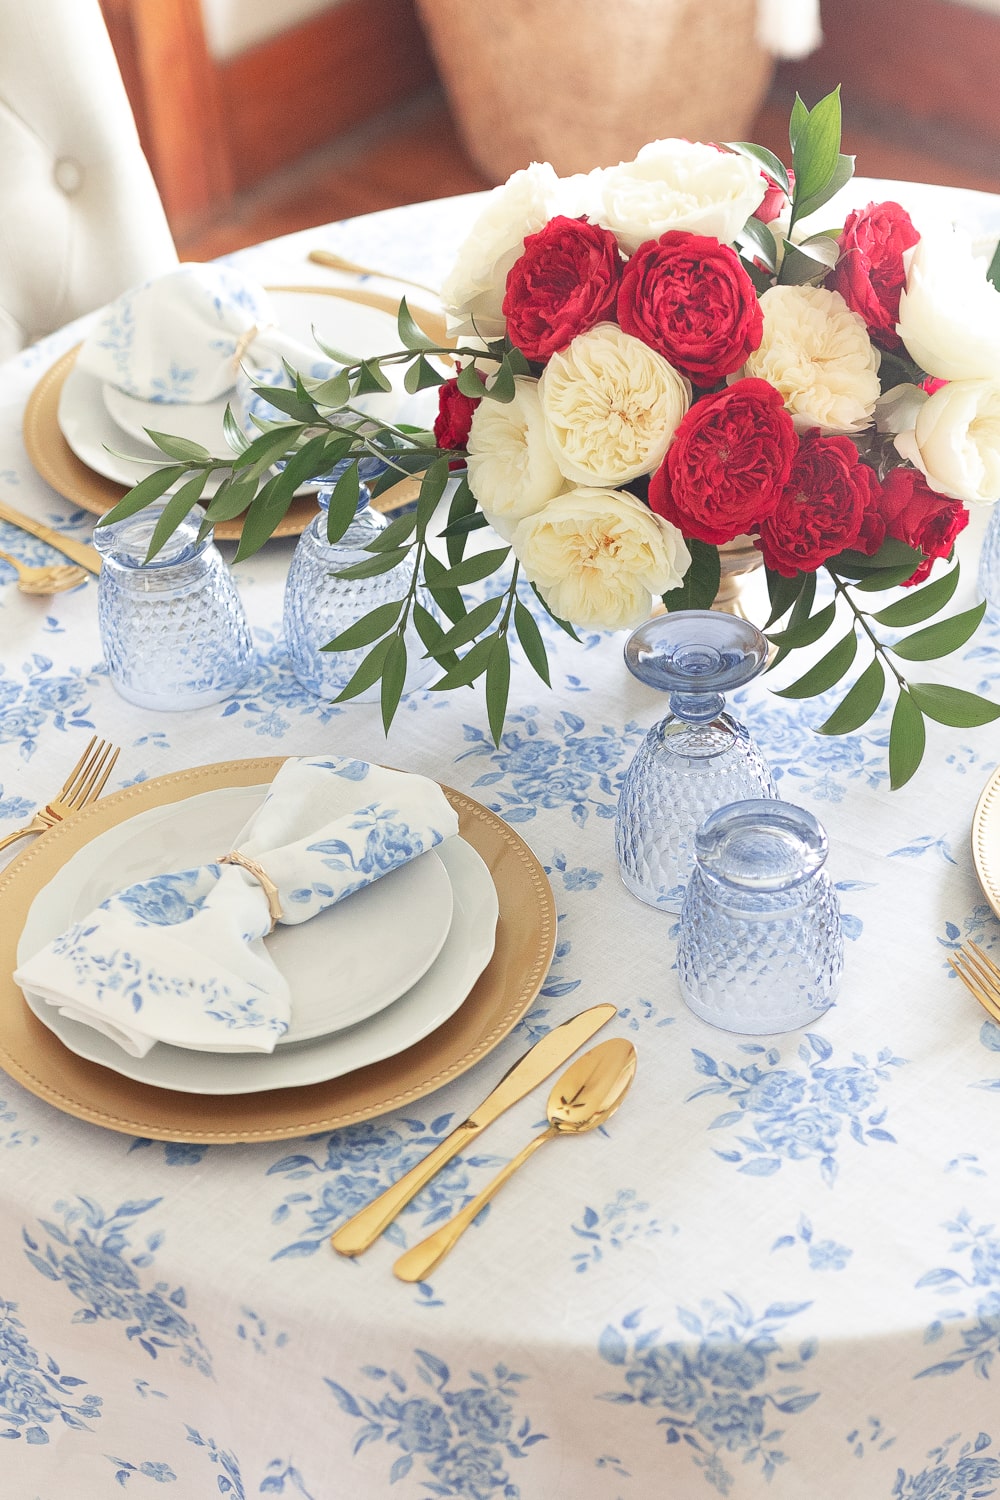 4th of July, Labor Day, or Memorial Day table designed by blogger Stephanie Ziajka on Diary of a Debutante